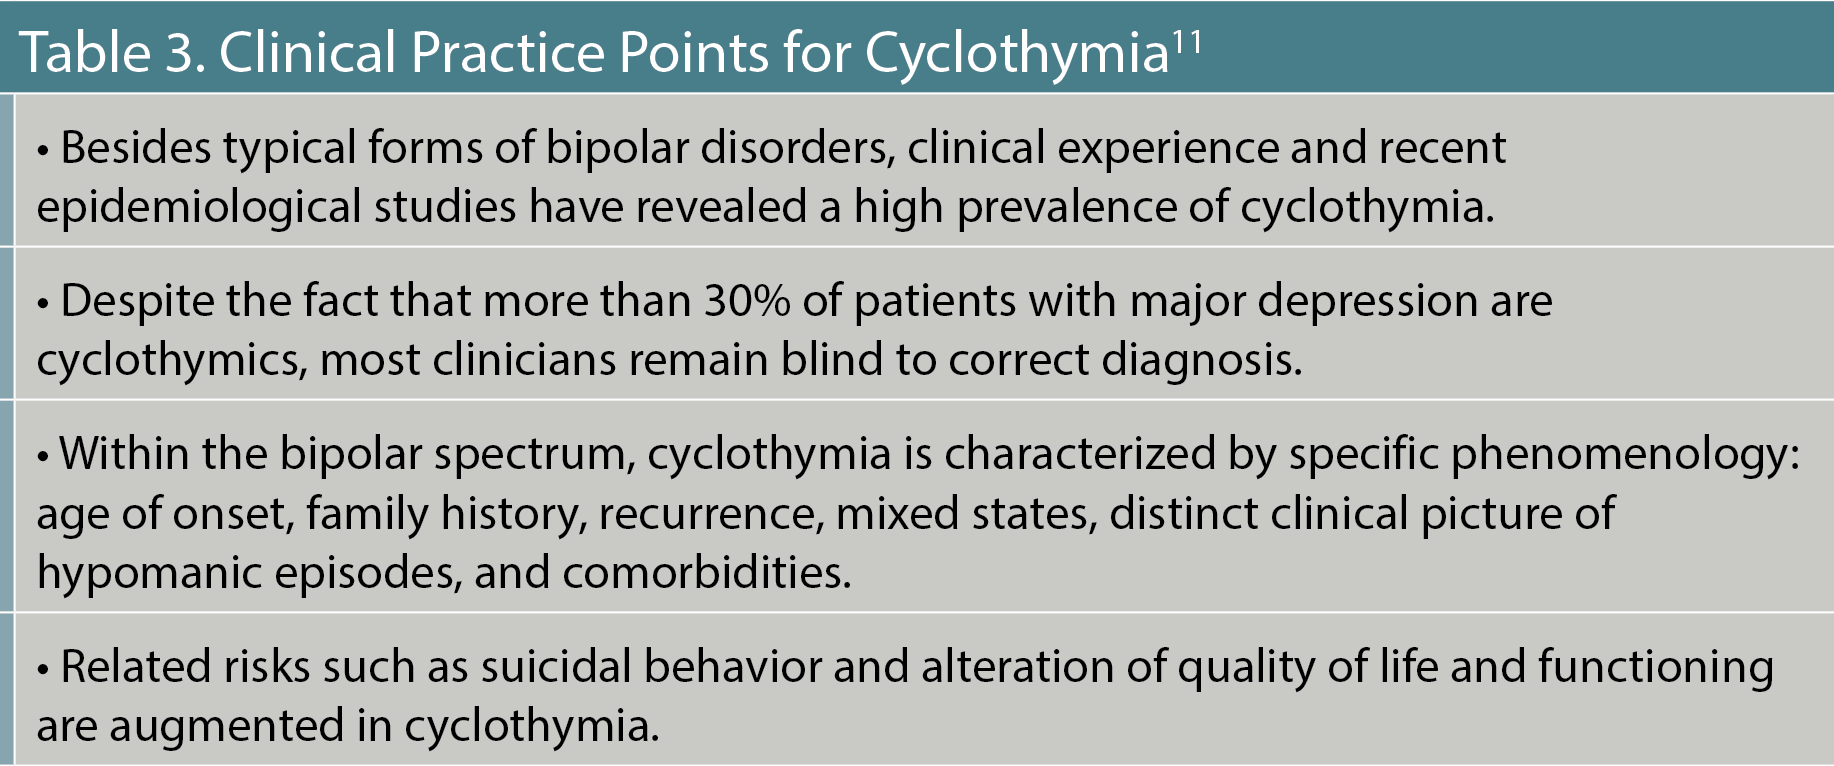 Table 3. Clinical Practice Points for Cyclothymia